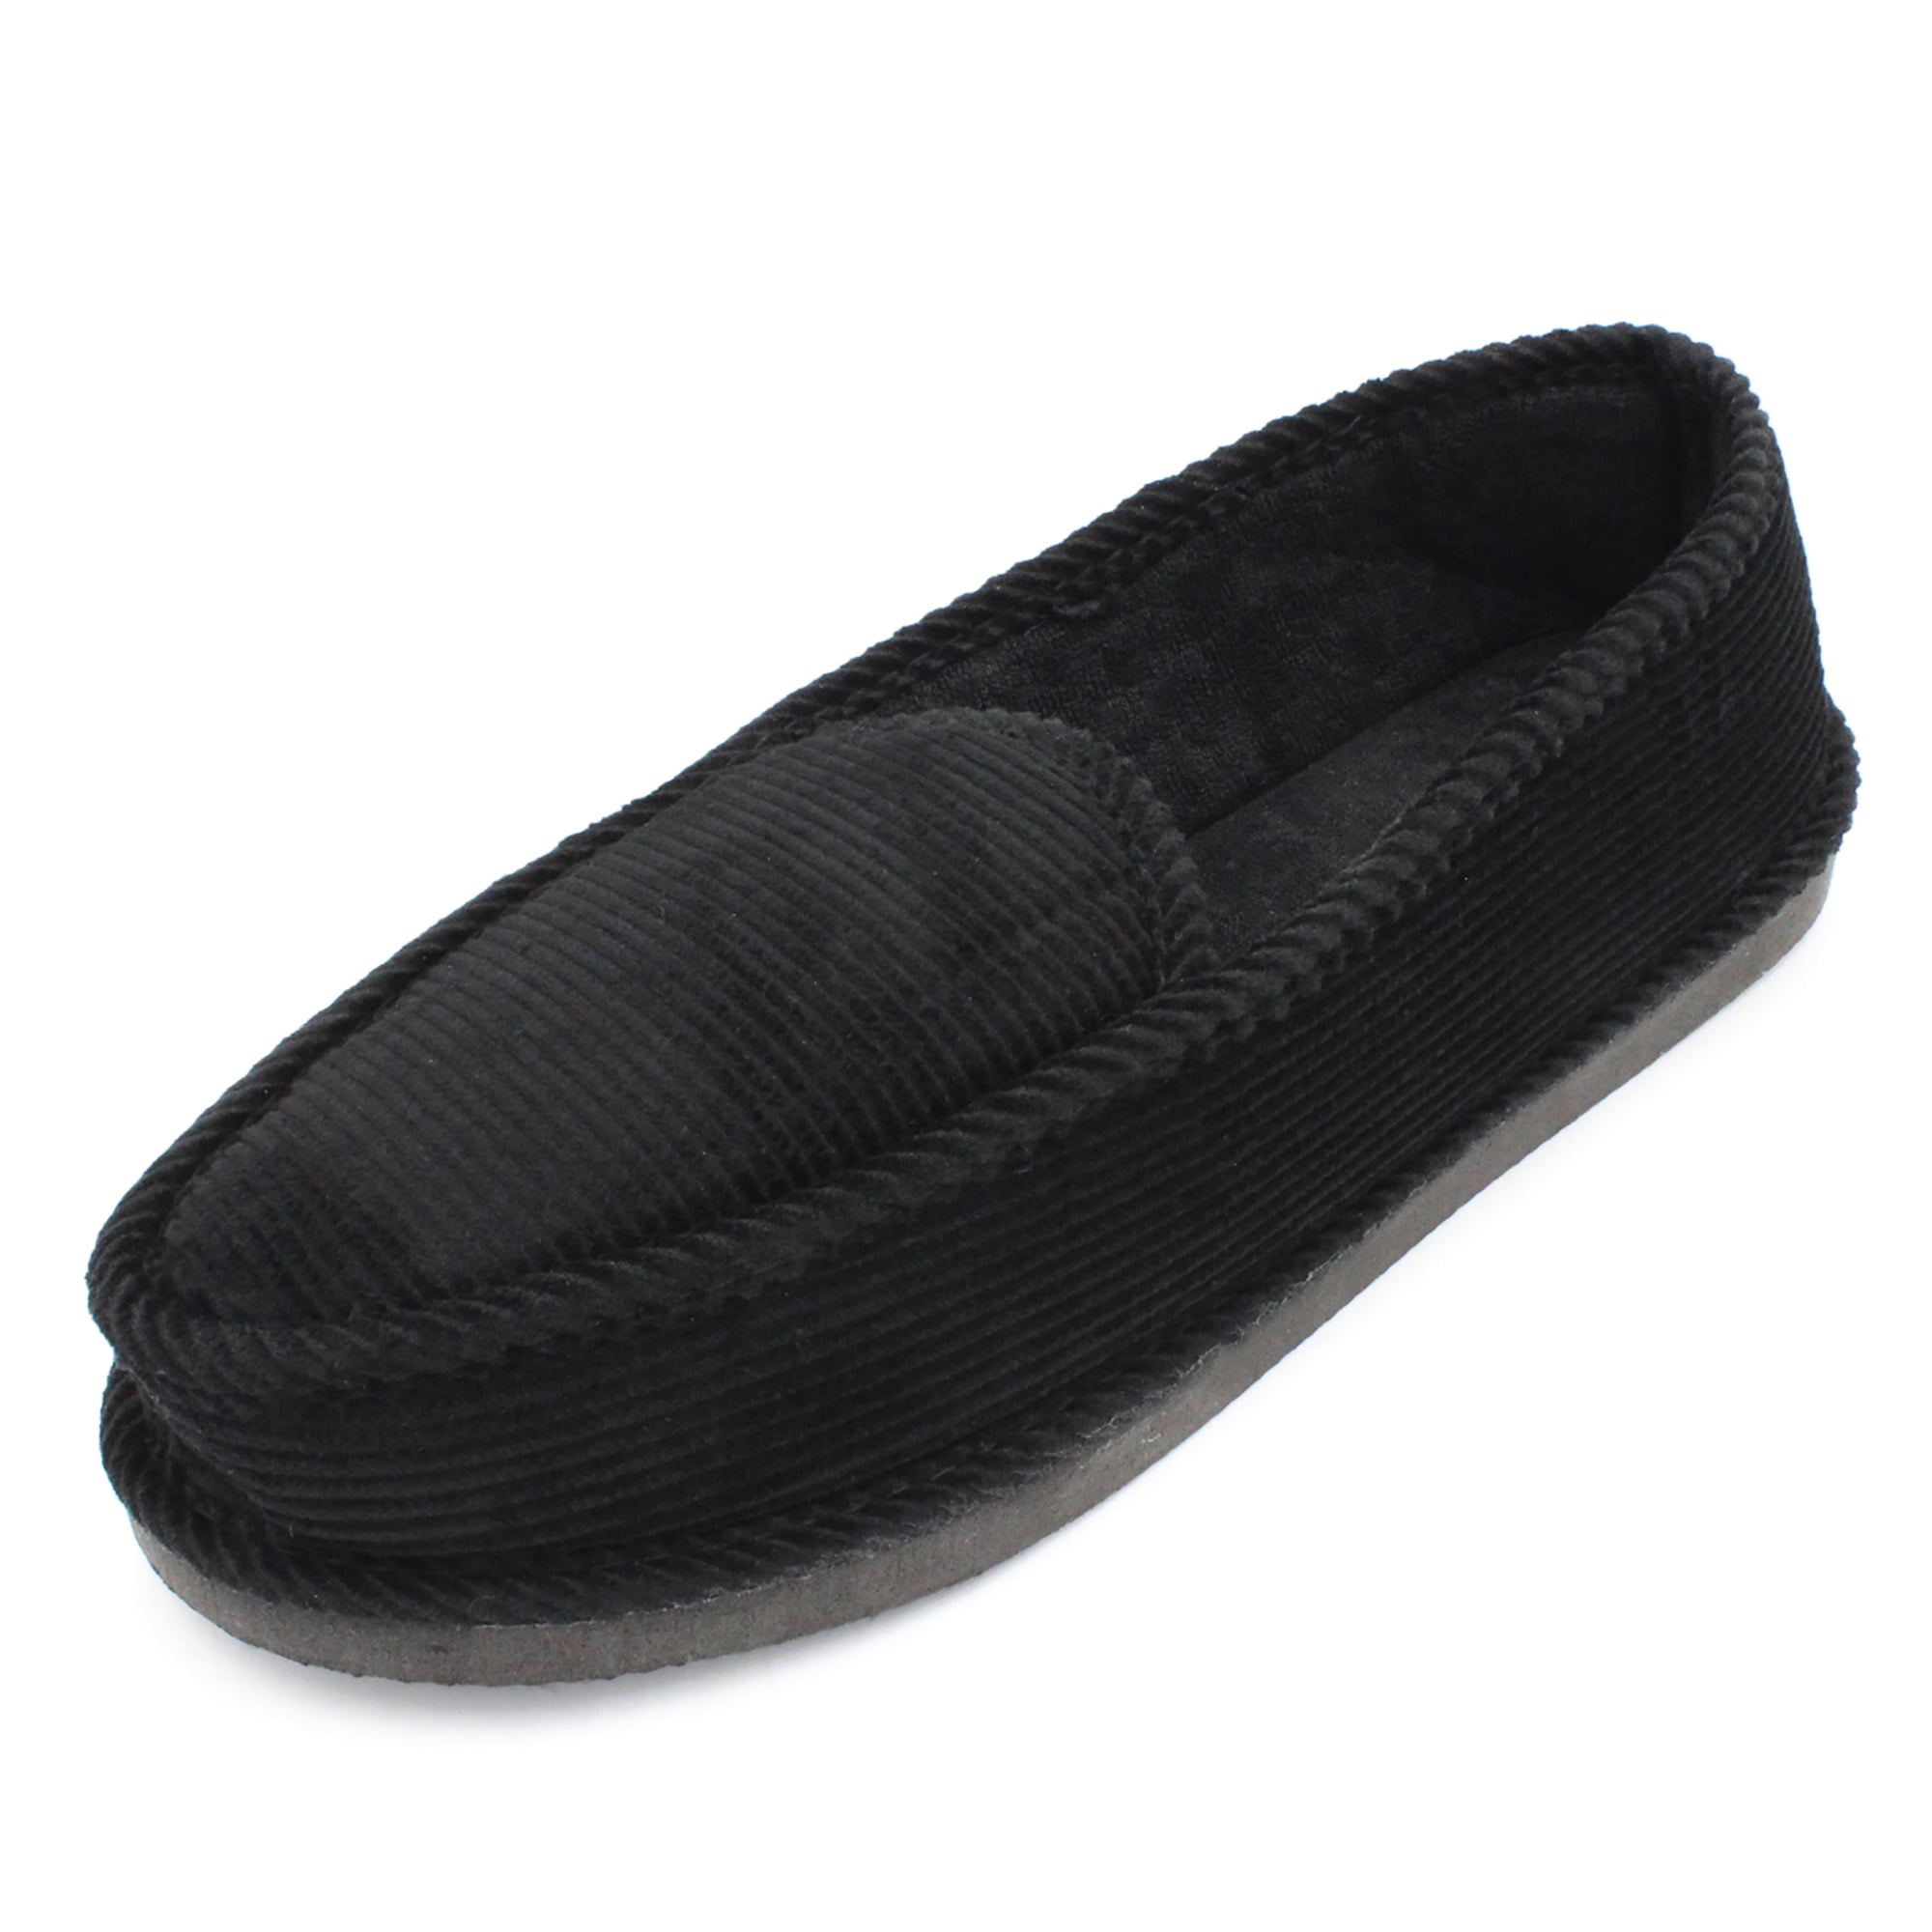 KIDENG Mens Lightweight Cotton Slippers Winter House Shoes Indoor Outdoor  Shoes 2208